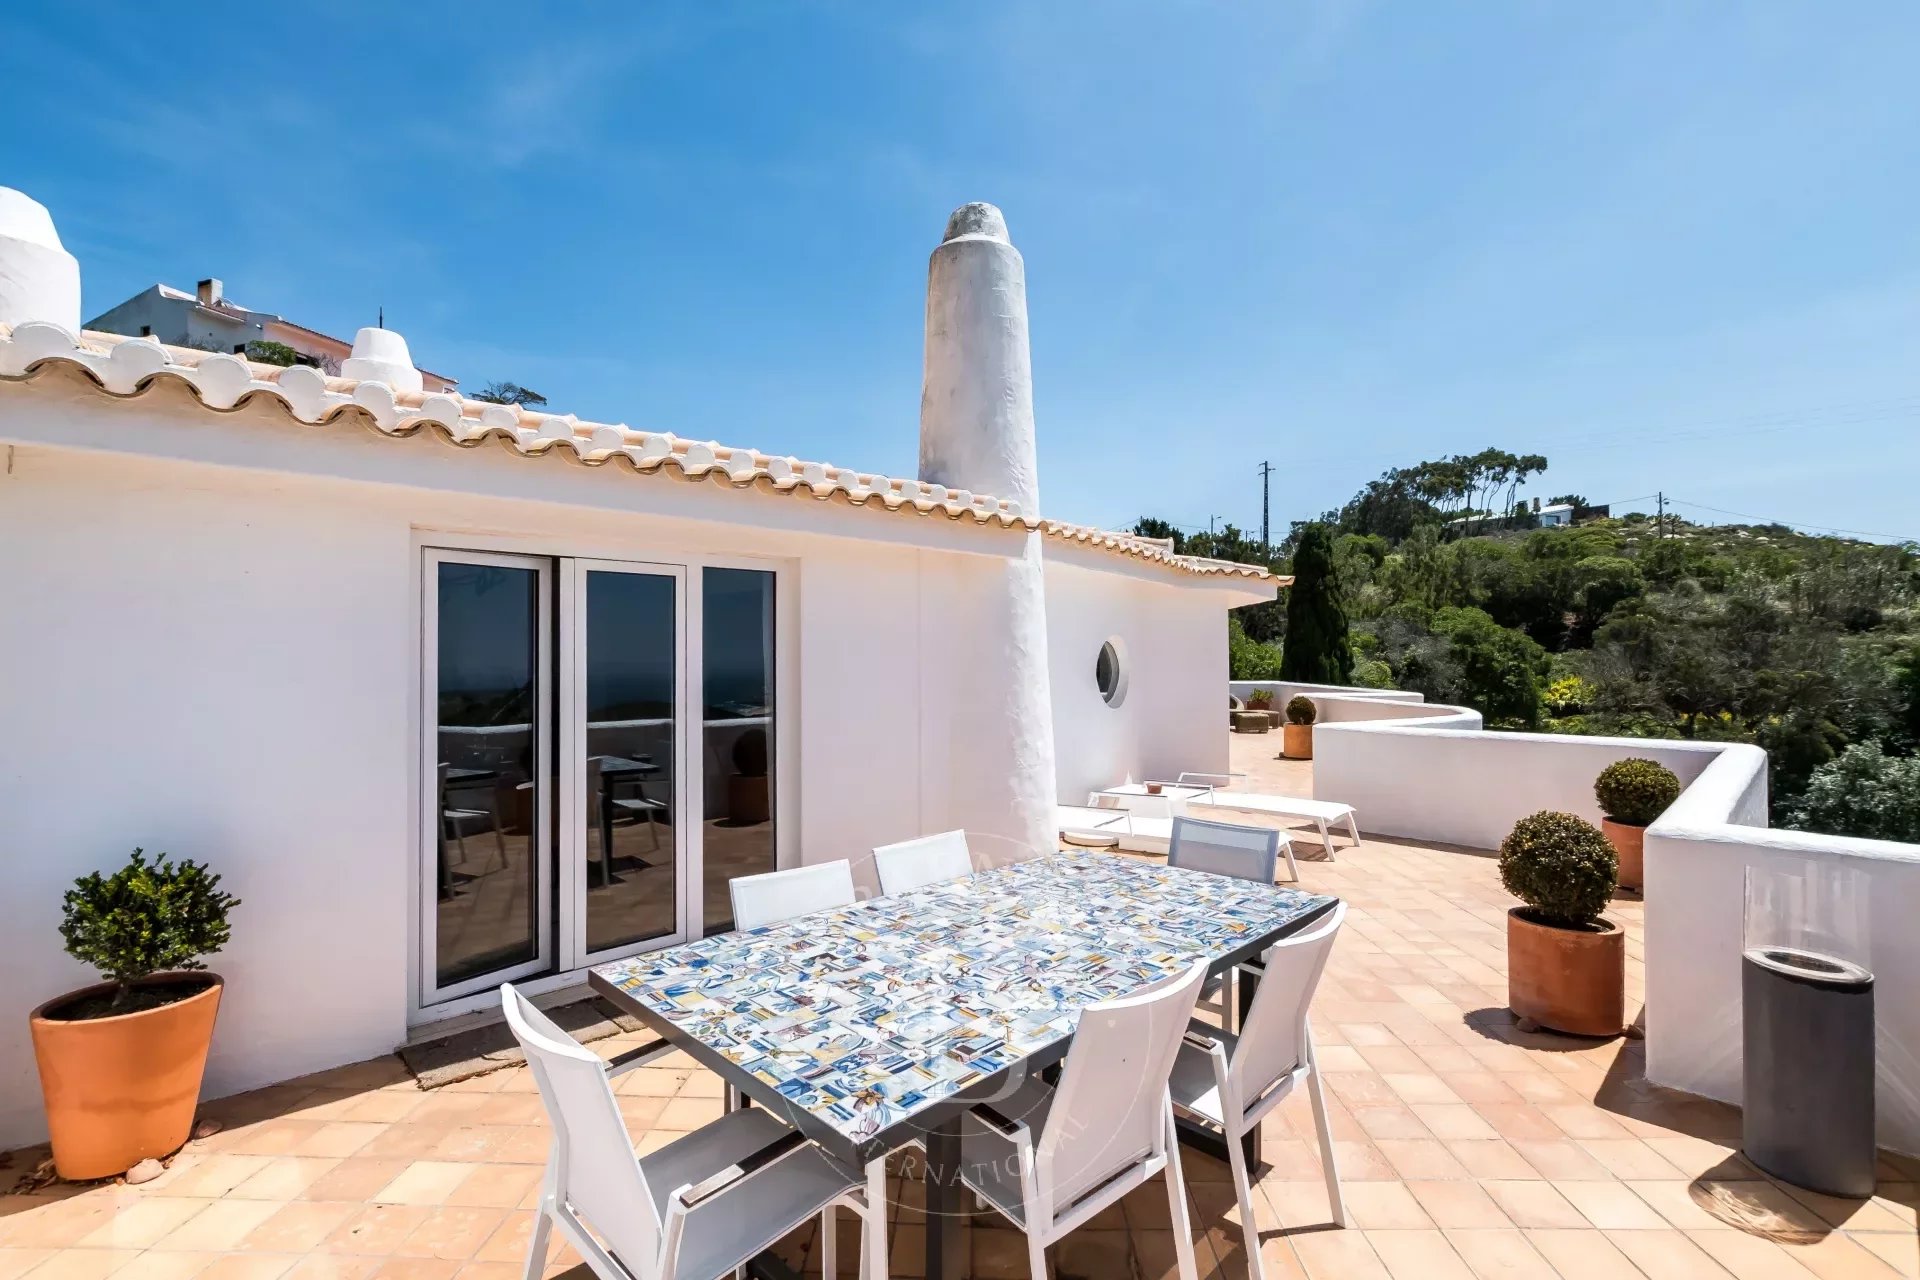 Property with 6 suites and a guest house in Cascais